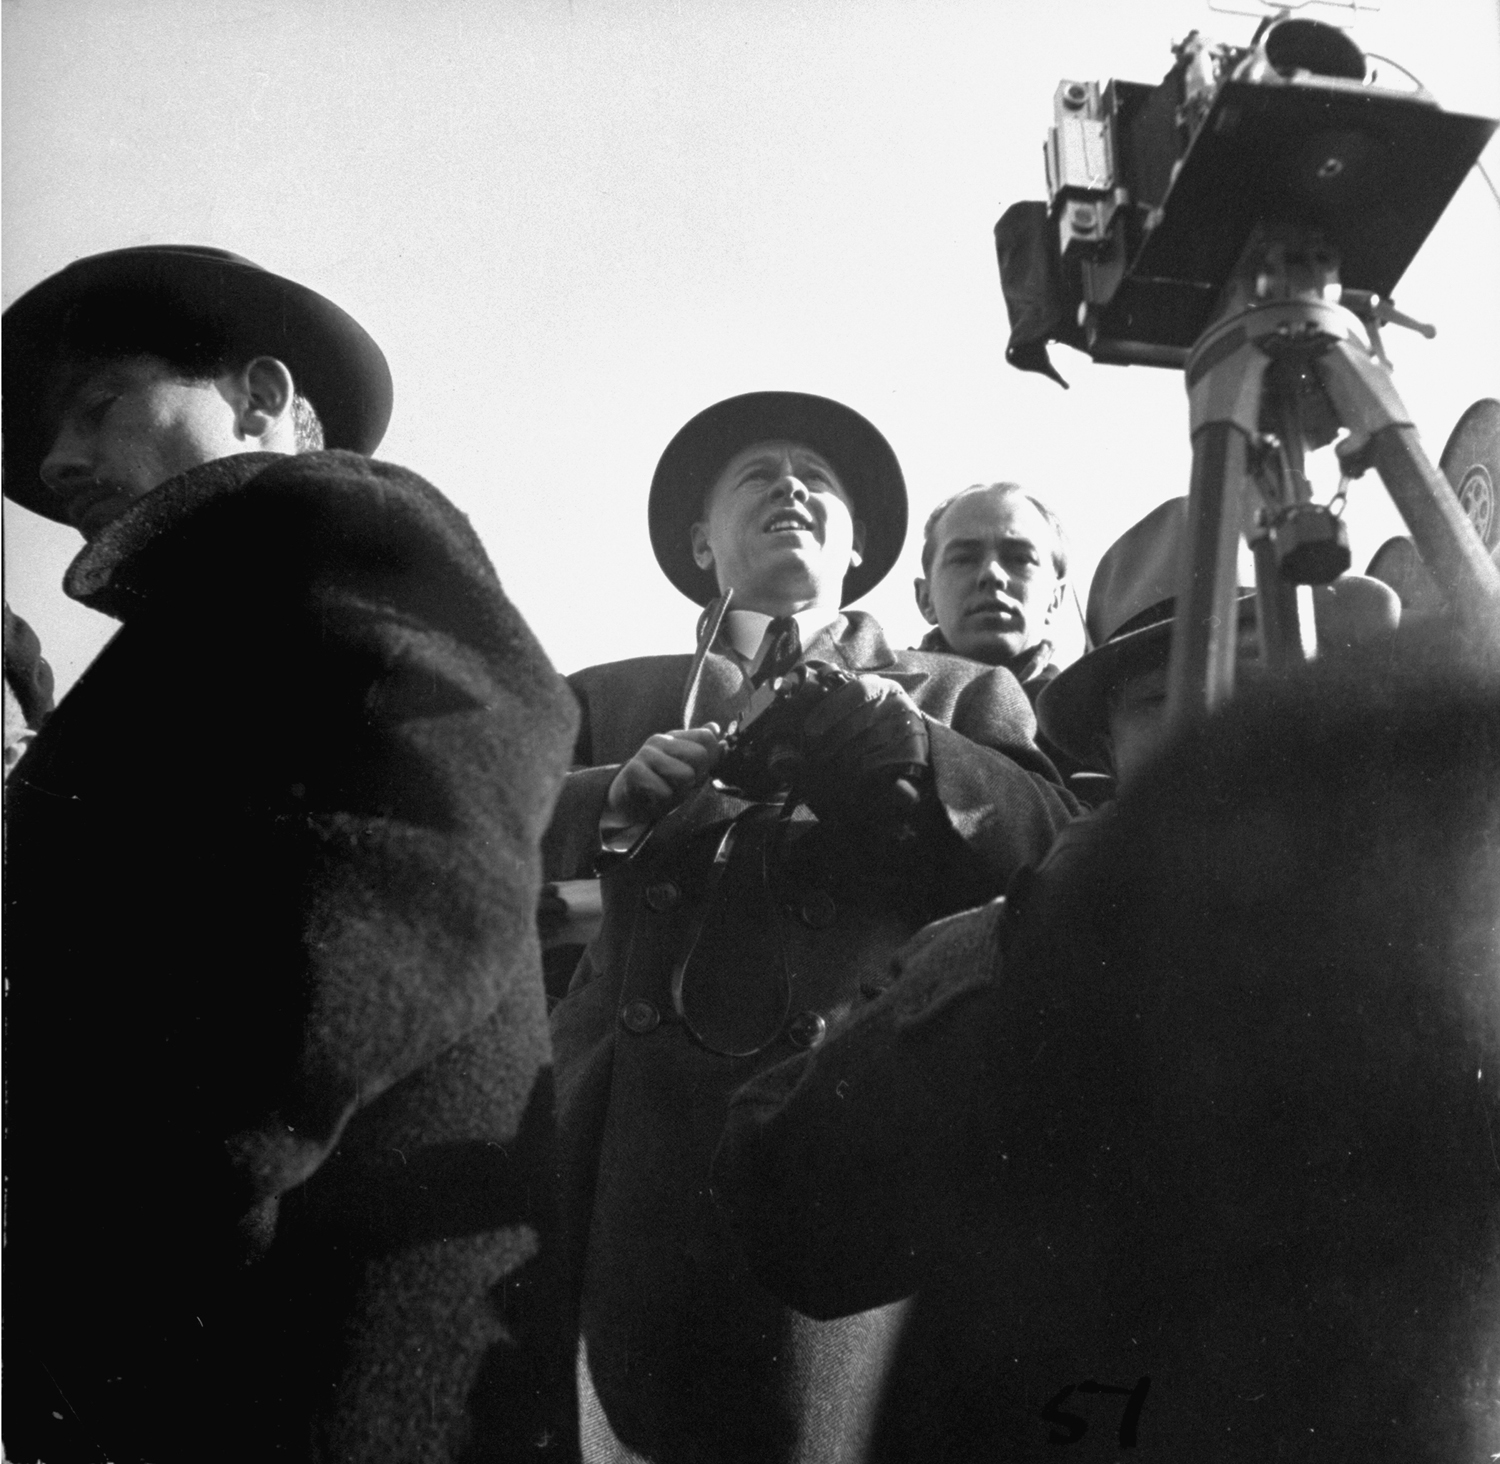 Reporters and photographers at President Franklin D. Roosevelt's inauguration in 1941.